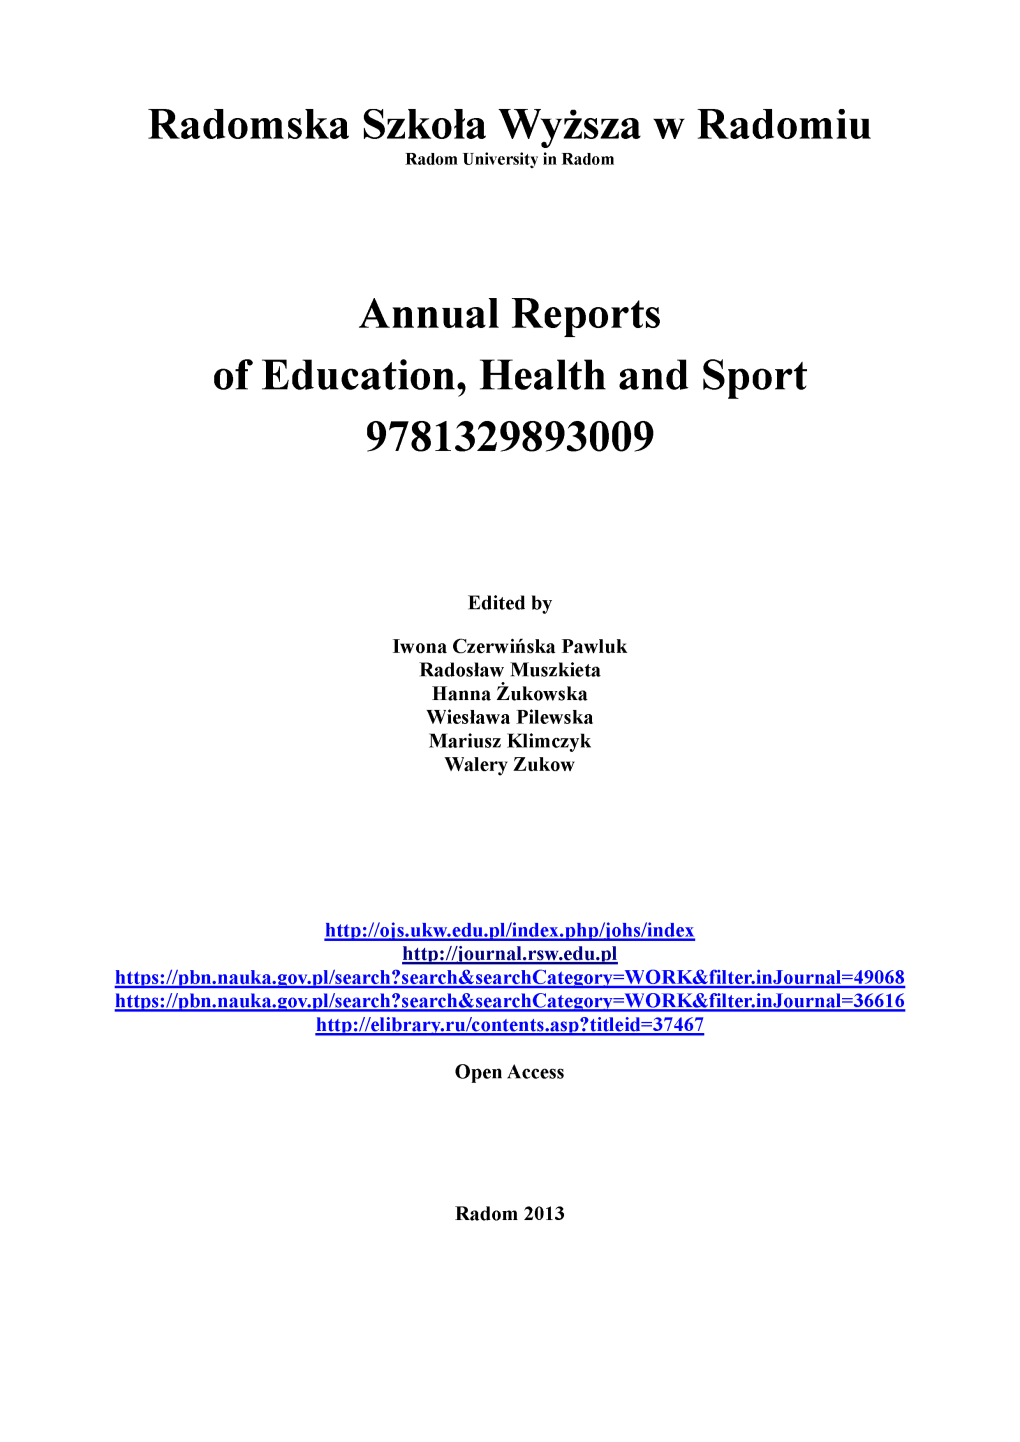 Annual Reports of Education, Health and Sport 9781329893009